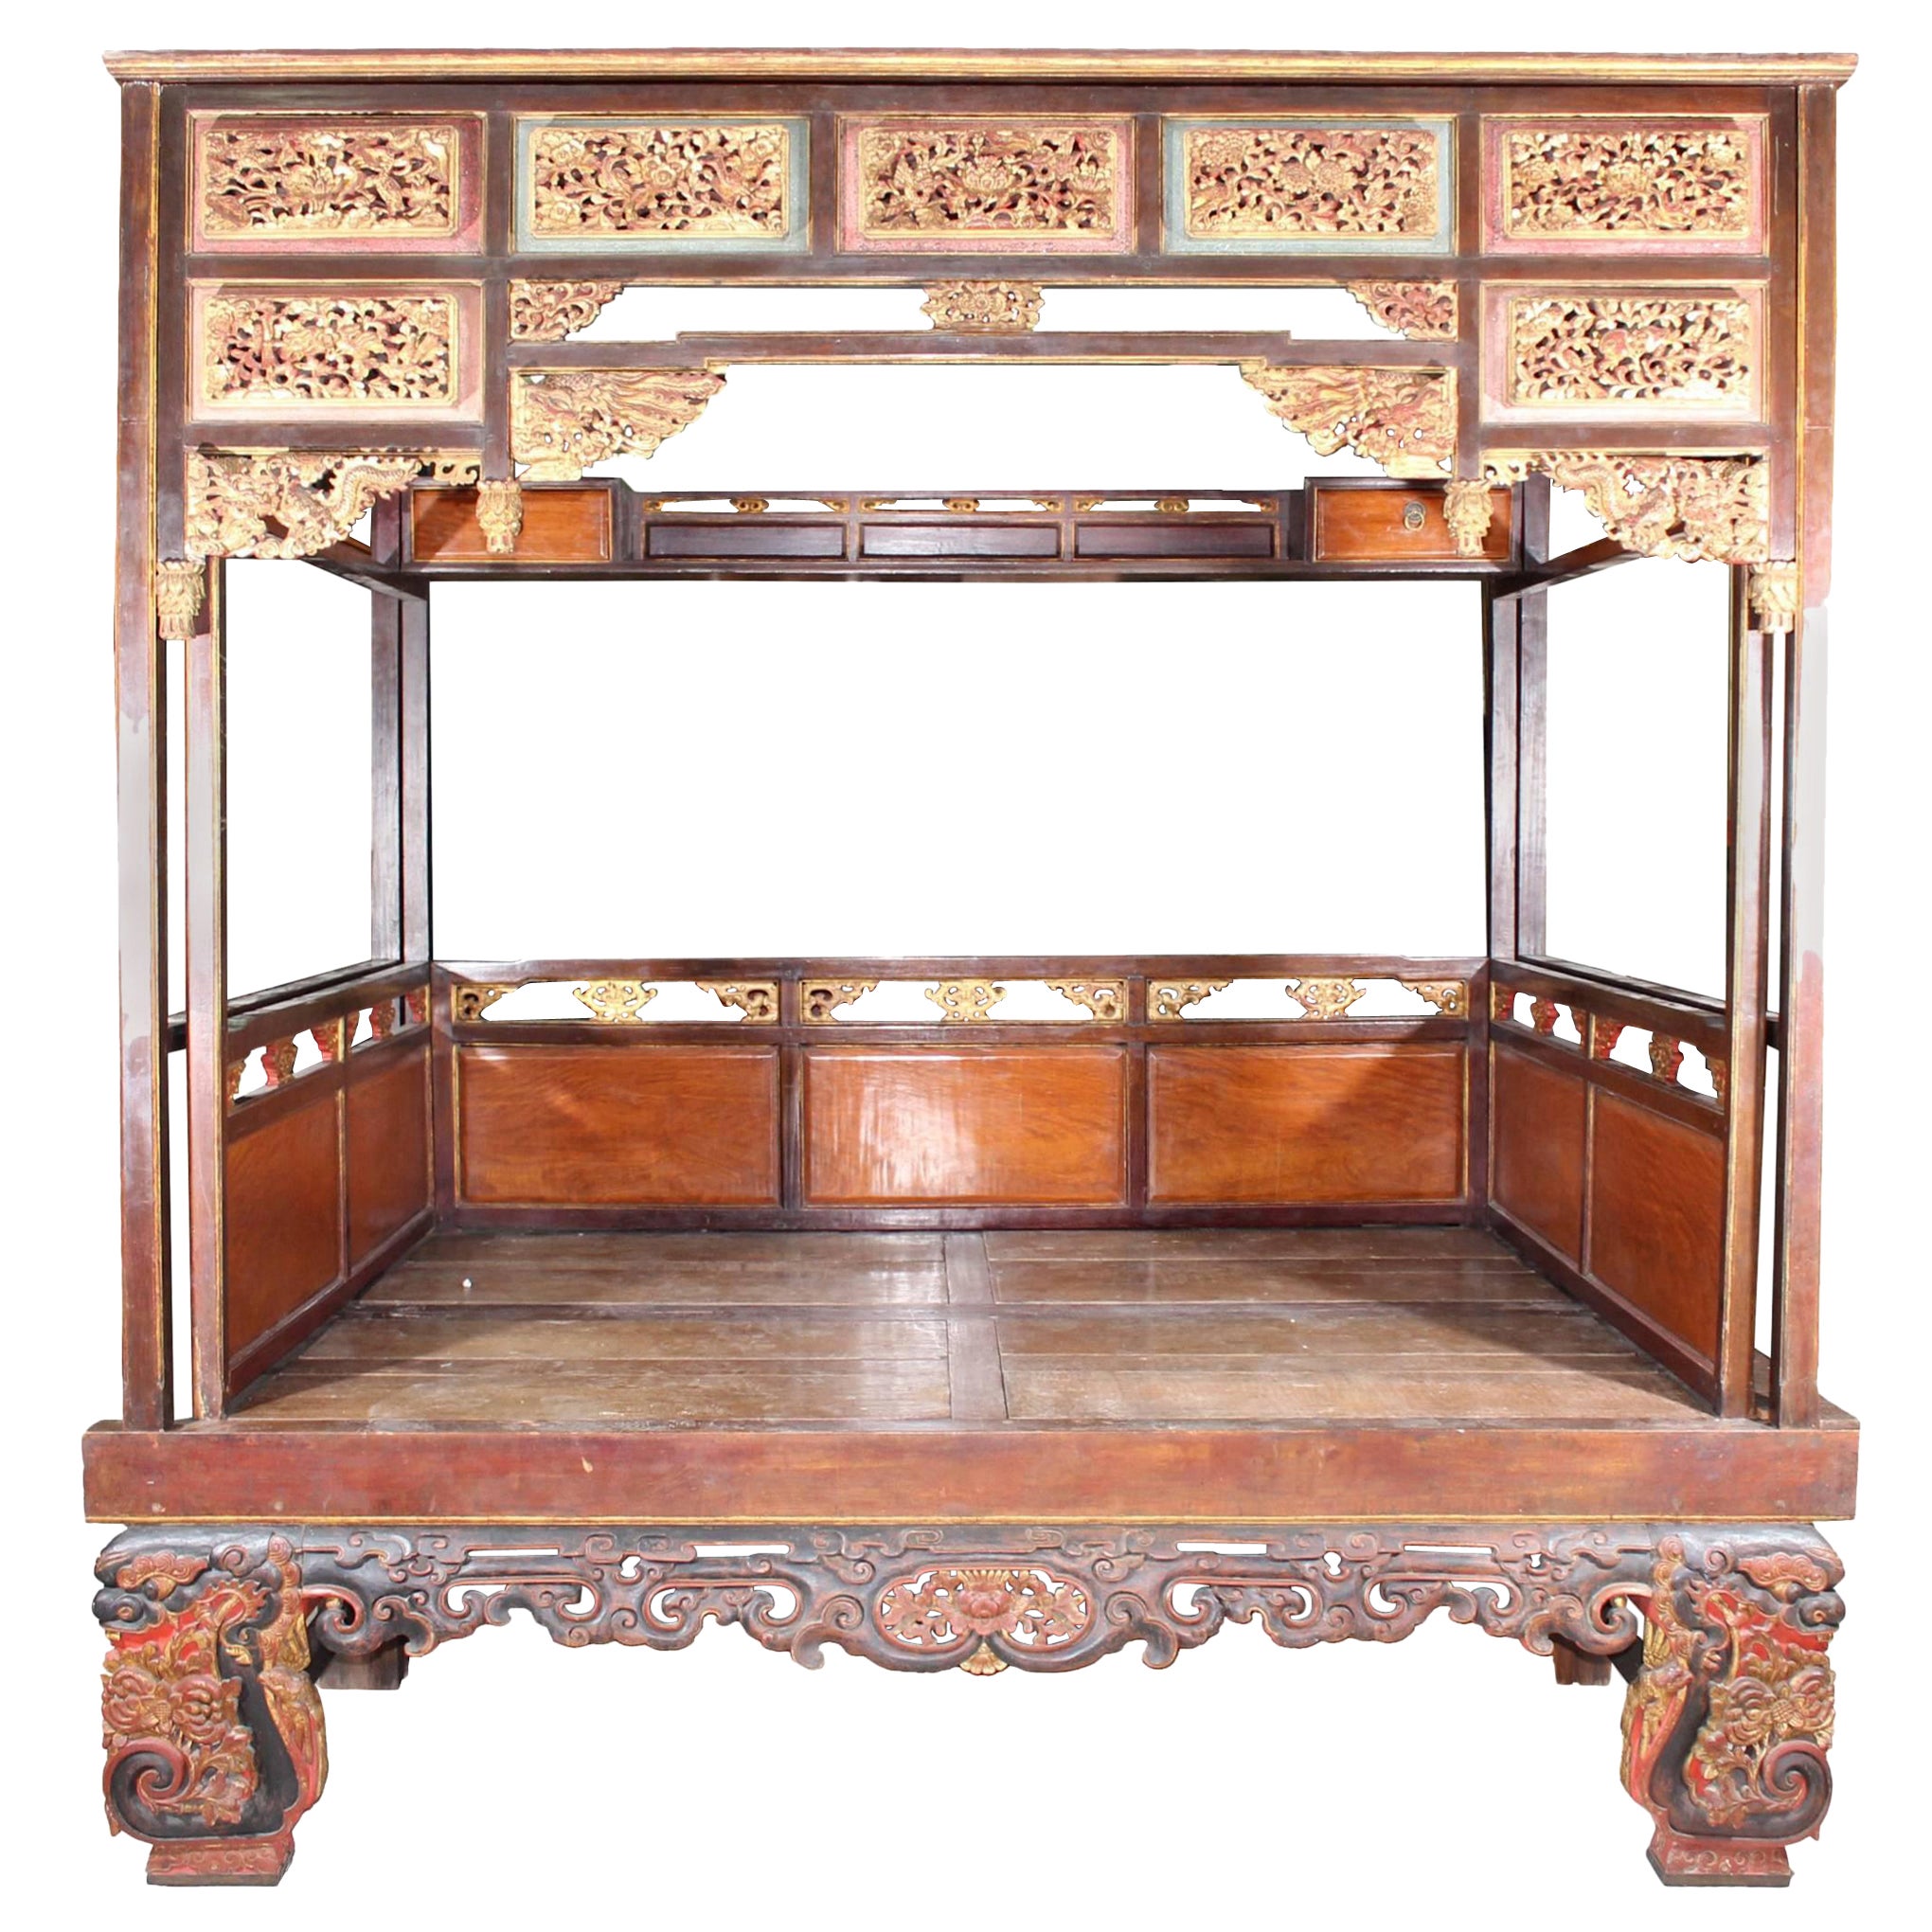 19th Century Chinese Canopy Wedding Bed